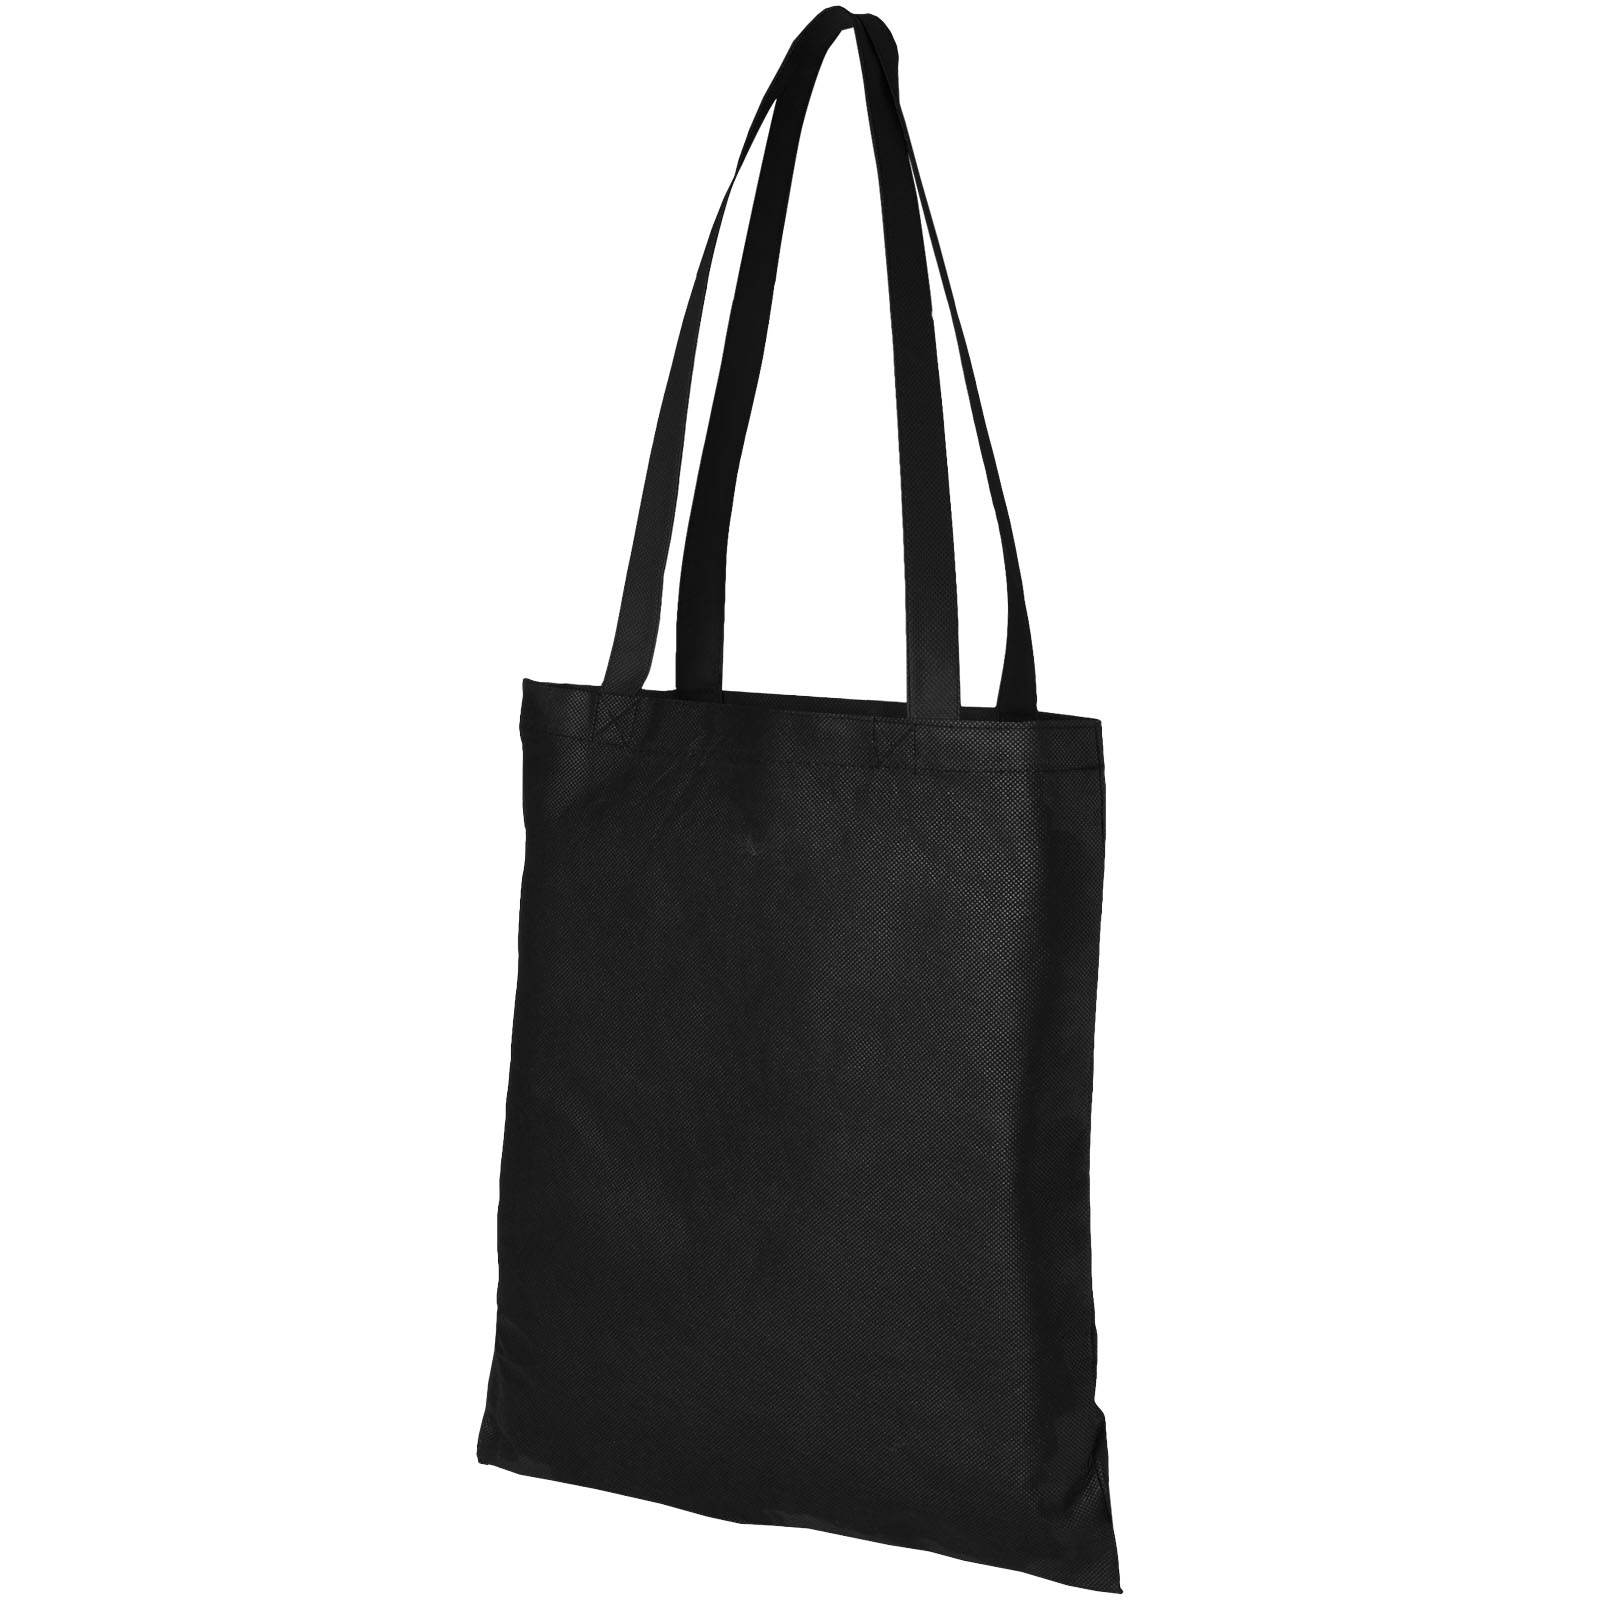 Conference bags - Zeus large non-woven convention tote bag 6L